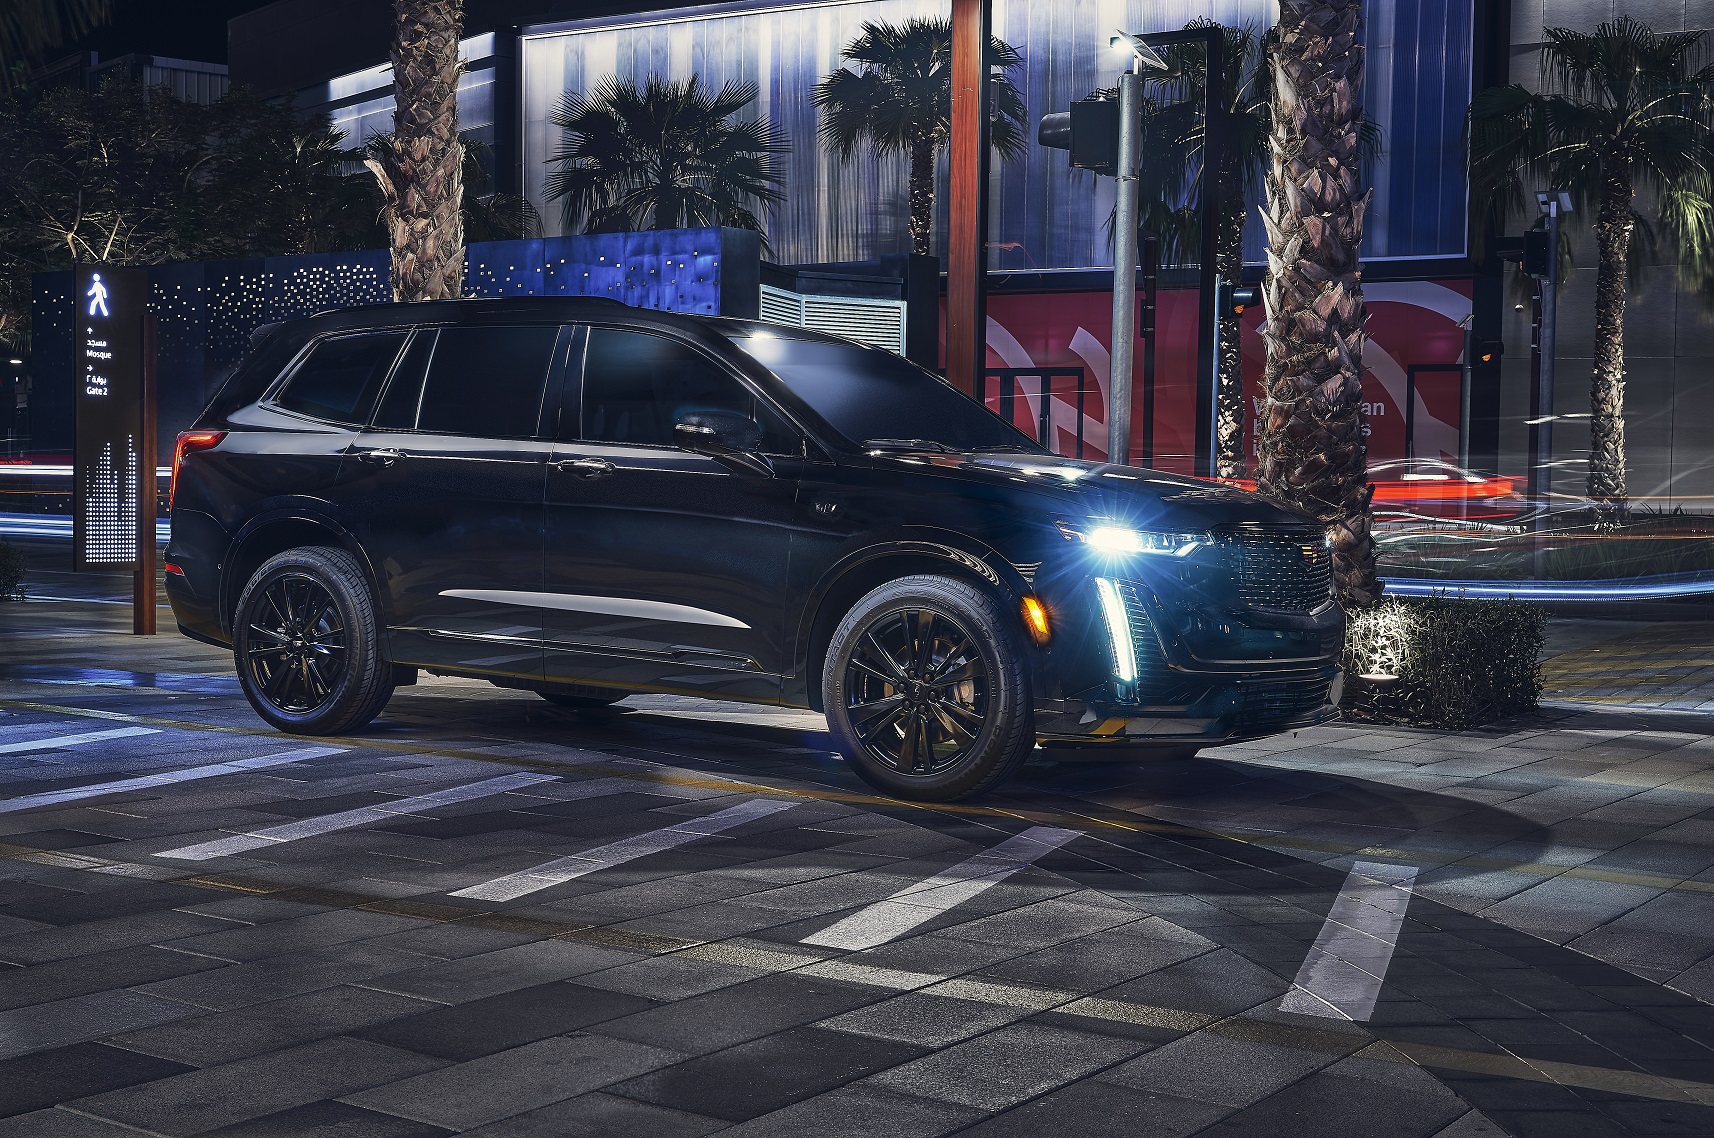 The All-New Cadillac XT6 Midnight Edition Makes Its UAE Debut